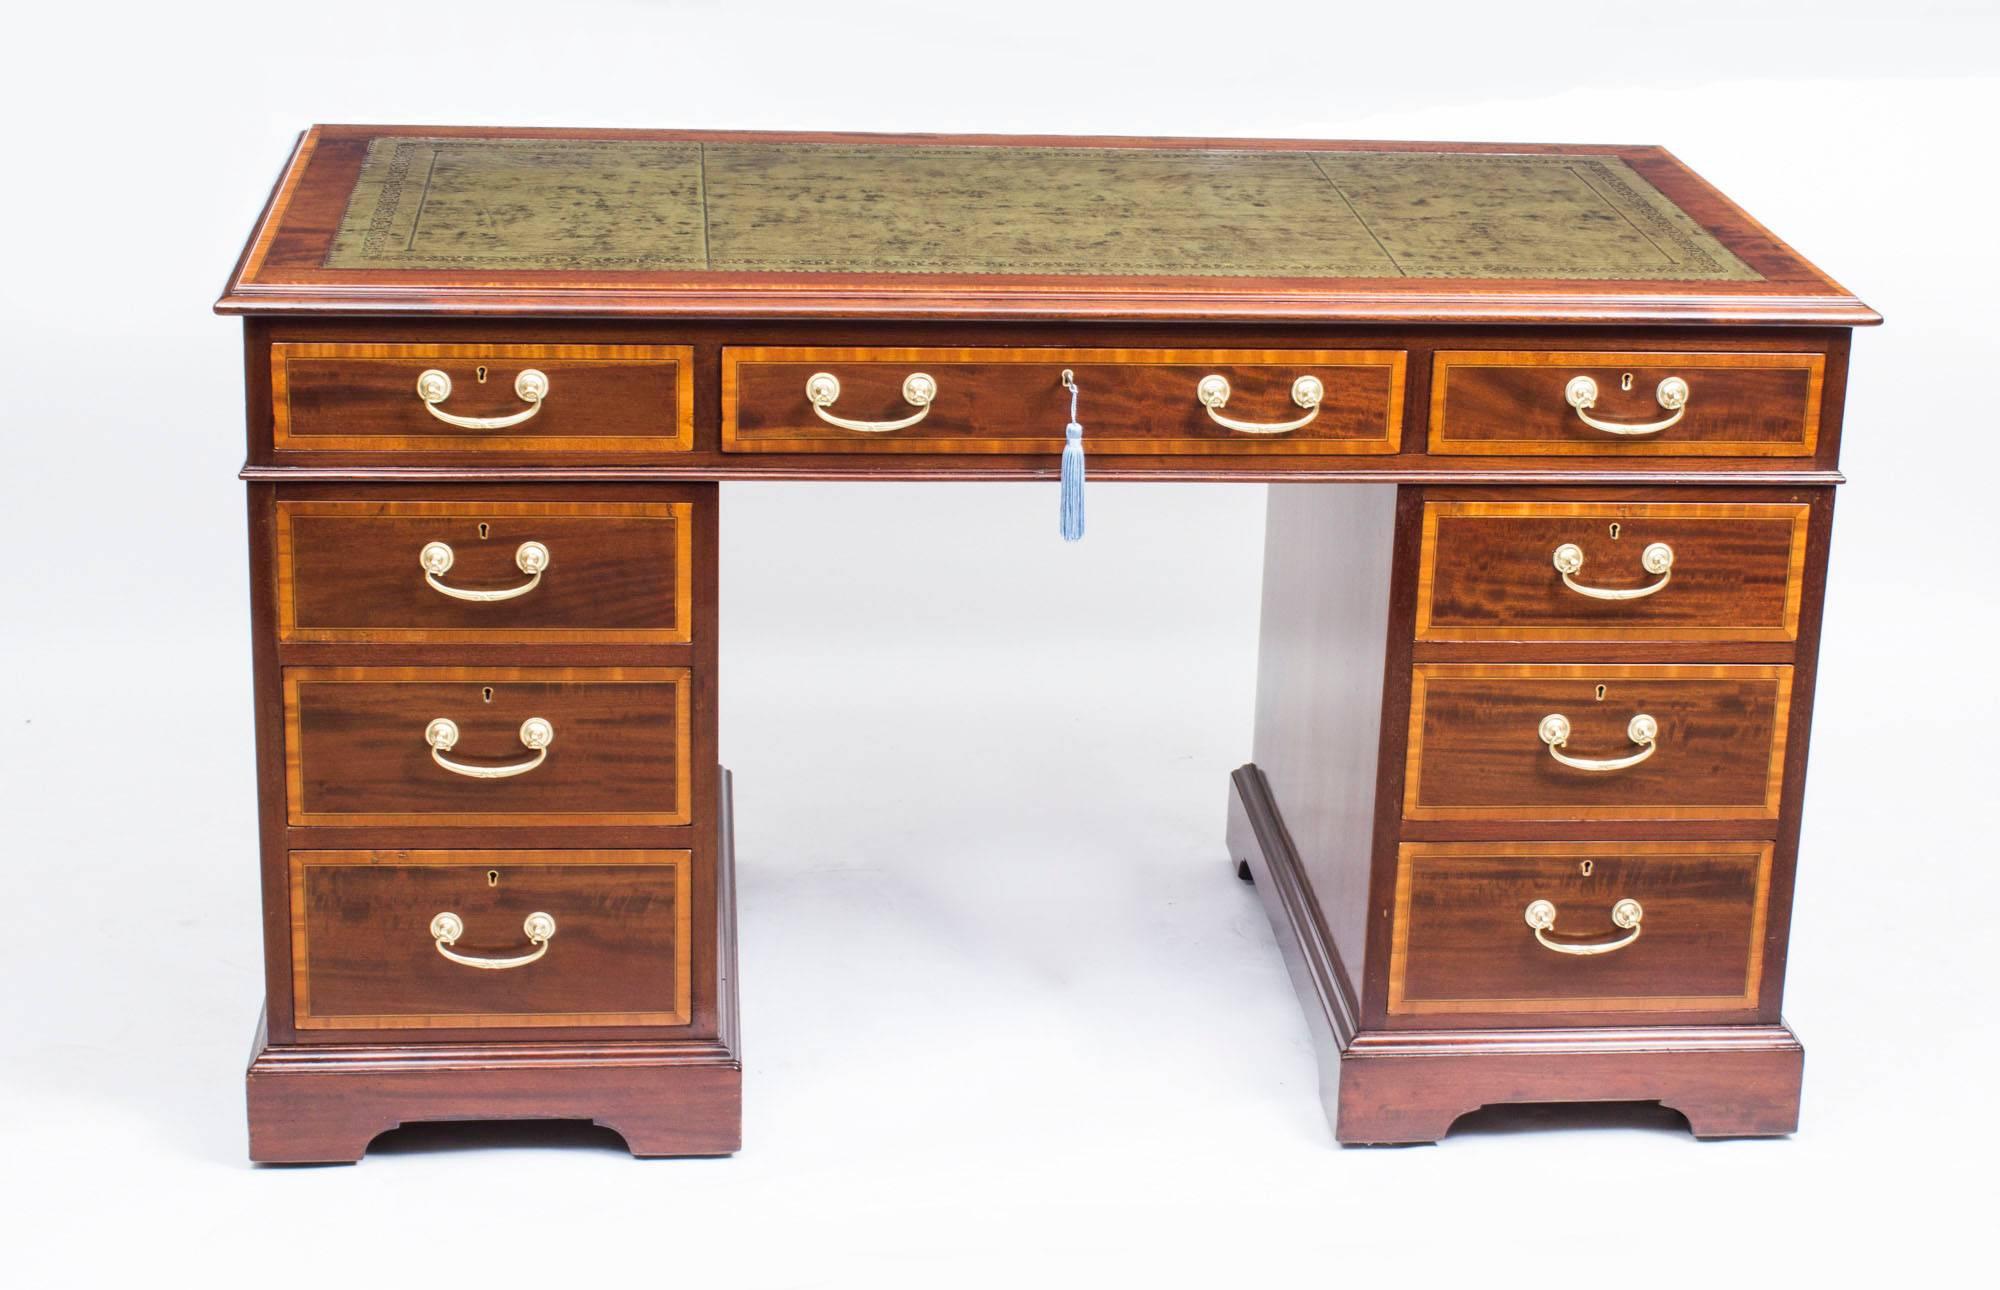 This is a superb antique Victorian flame mahogany and kingwood crossbanded freestanding pedestal desk, circa 1880 in date.

It is made from fabulous flame mahogany with a rectangular green gold tooled leather, and the top features an elegant ogee